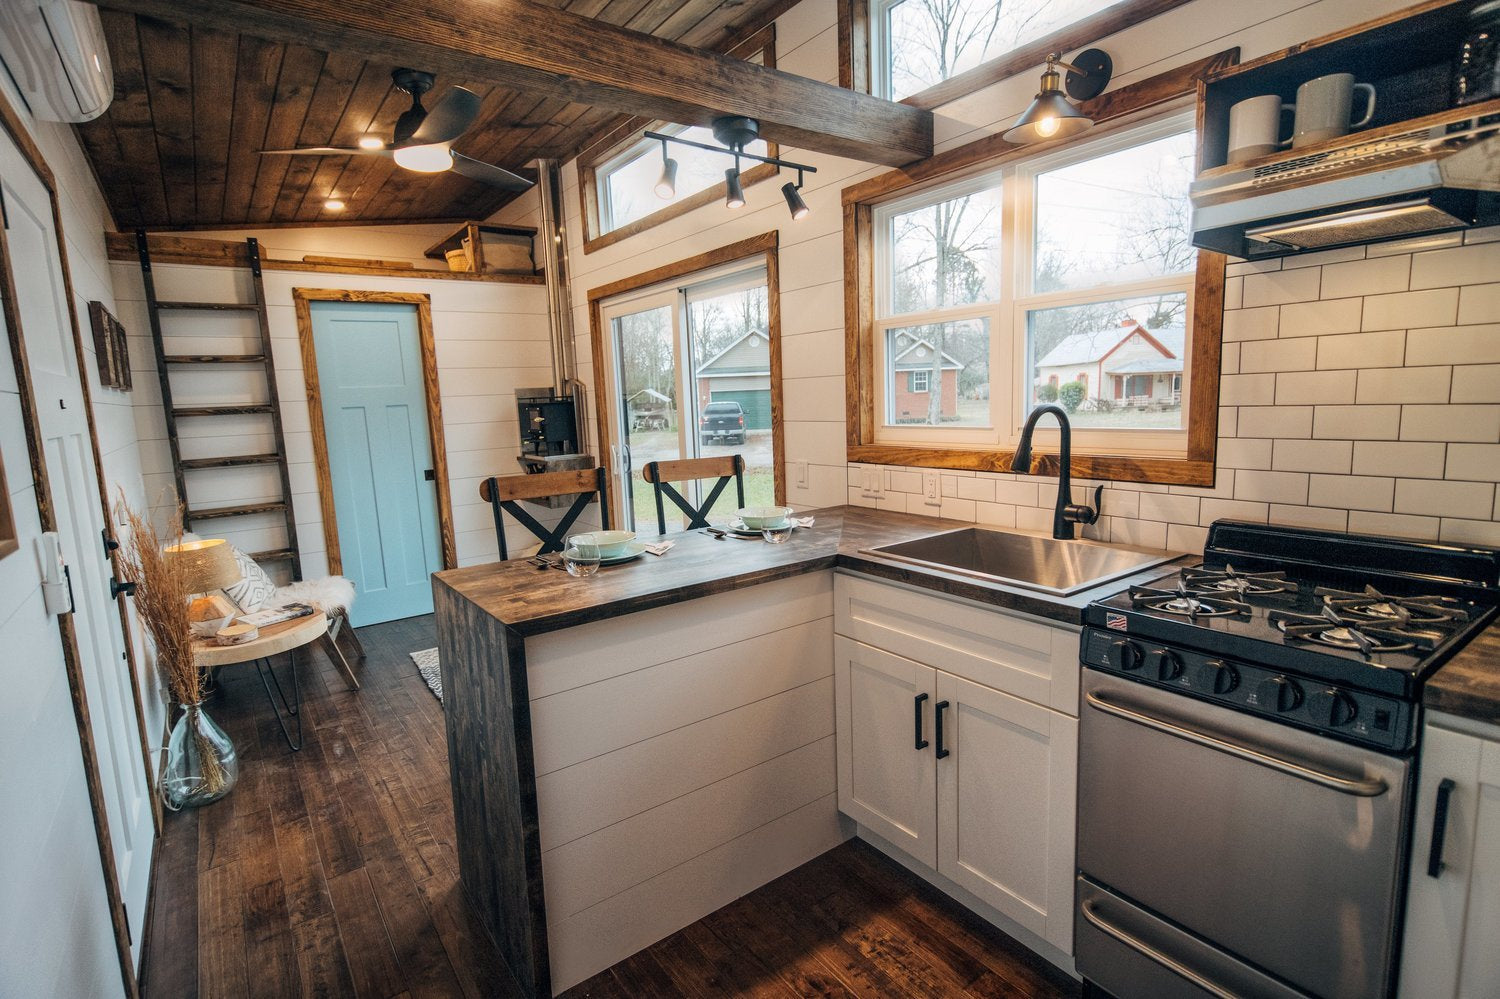 Awesome tiny Home Kitchen by Wind River Tiny Homes  https://www.windrivertinyhomes.com/the-lupine